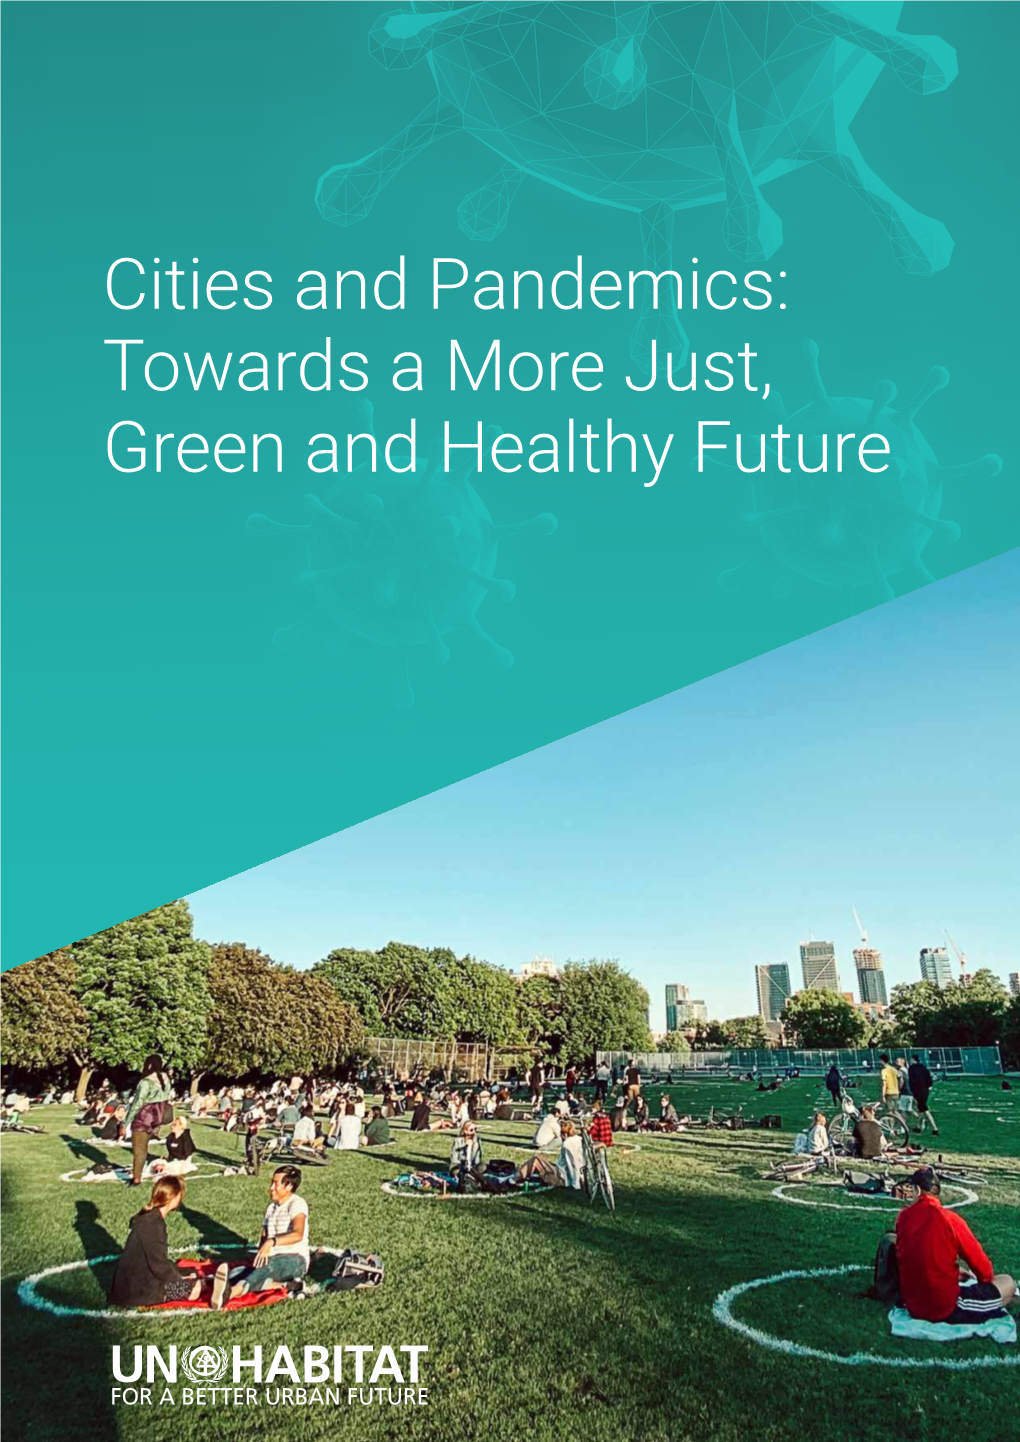 Cities and Pandemics: Towards a More Just, Green and Healthy Future Cover Photo: Keeping Social Distance During COVID-19 Pandemic in Bellwoods Park, Toronto, Canada